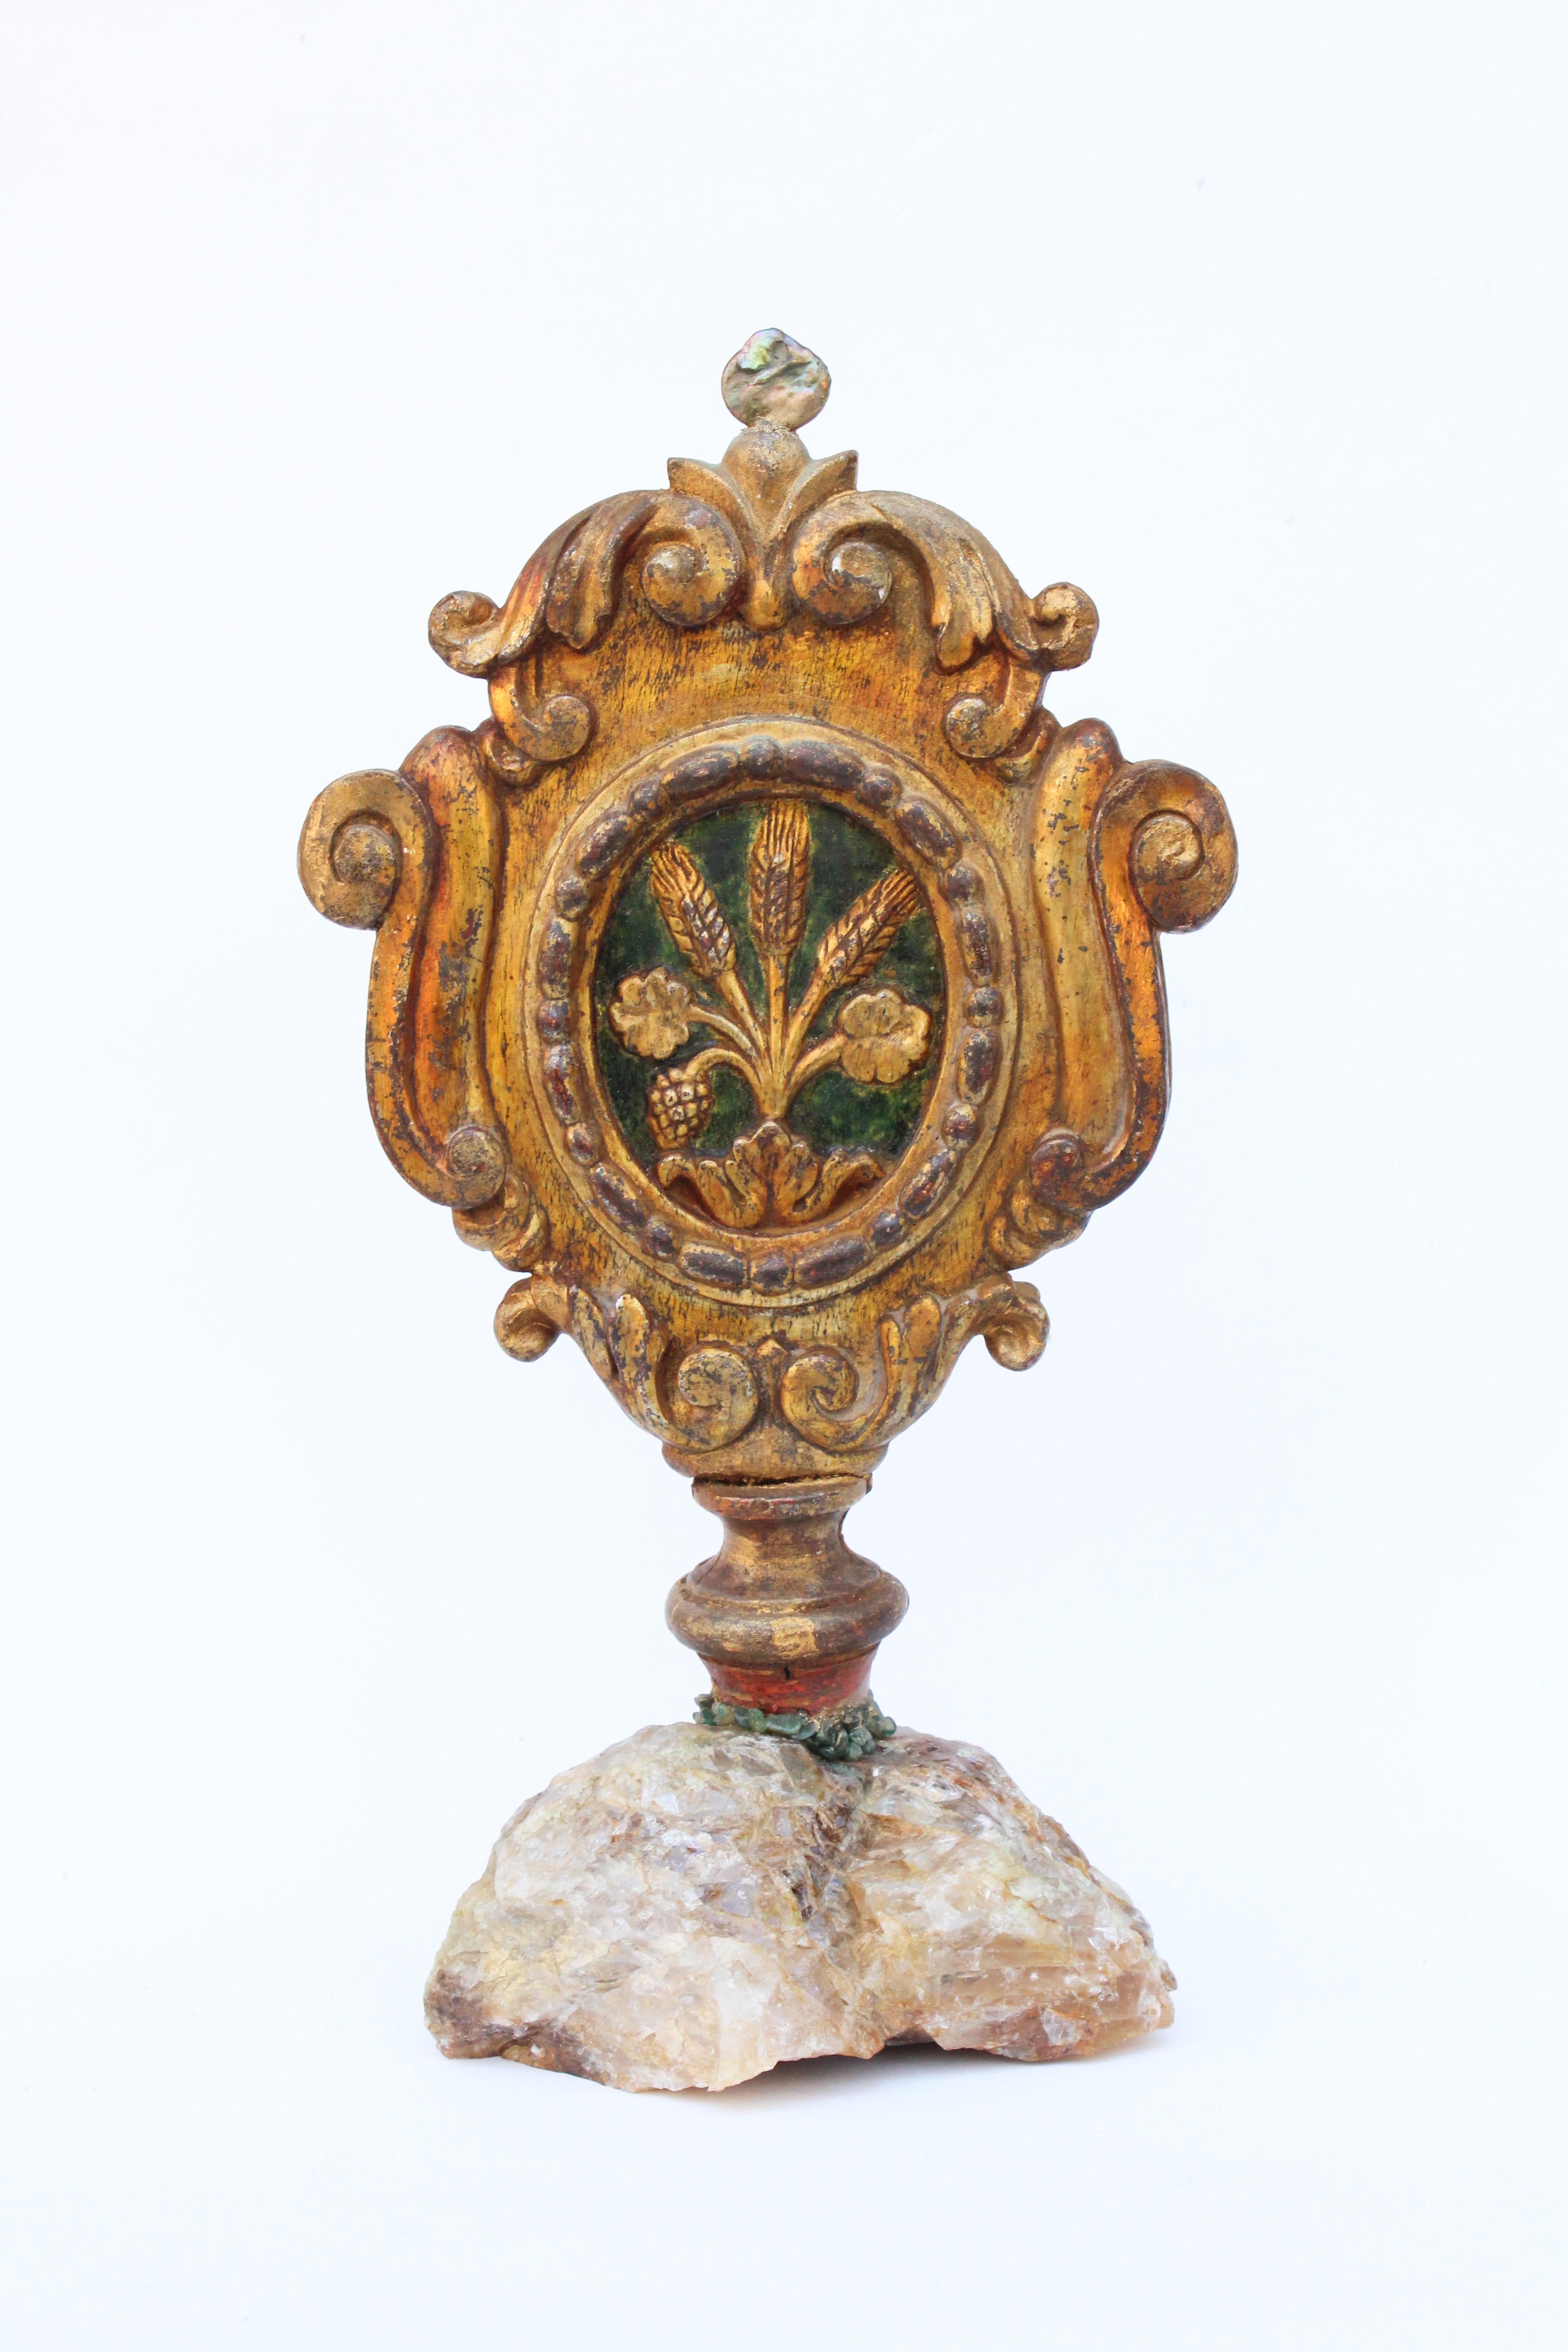 18th century Italian gilded and hand-painted processional finial with baroque pearls and adventurine and mounted on honey calcite. The piece was originally part of a processional pole from a historical church in Italy. The eucharist is painted and